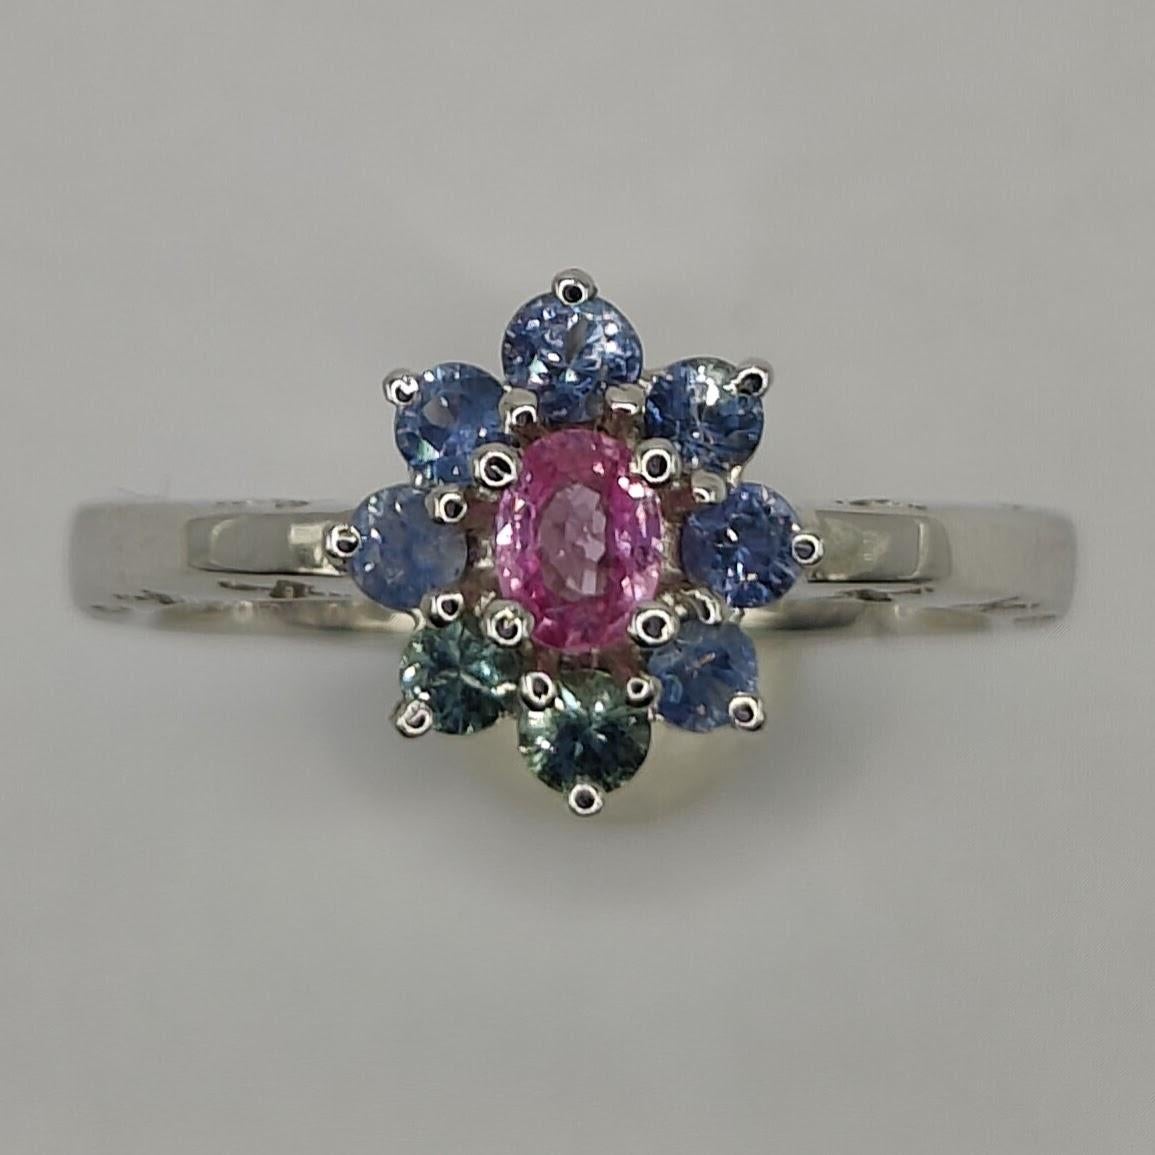 Introducing our gorgeous 3.32ct Blue, Pink & Green Sapphire Ring & Necklace Set in 18K White Gold. This dainty set is the perfect addition to your jewelry collection, offering a touch of elegance and sophistication to any outfit.

The ring features